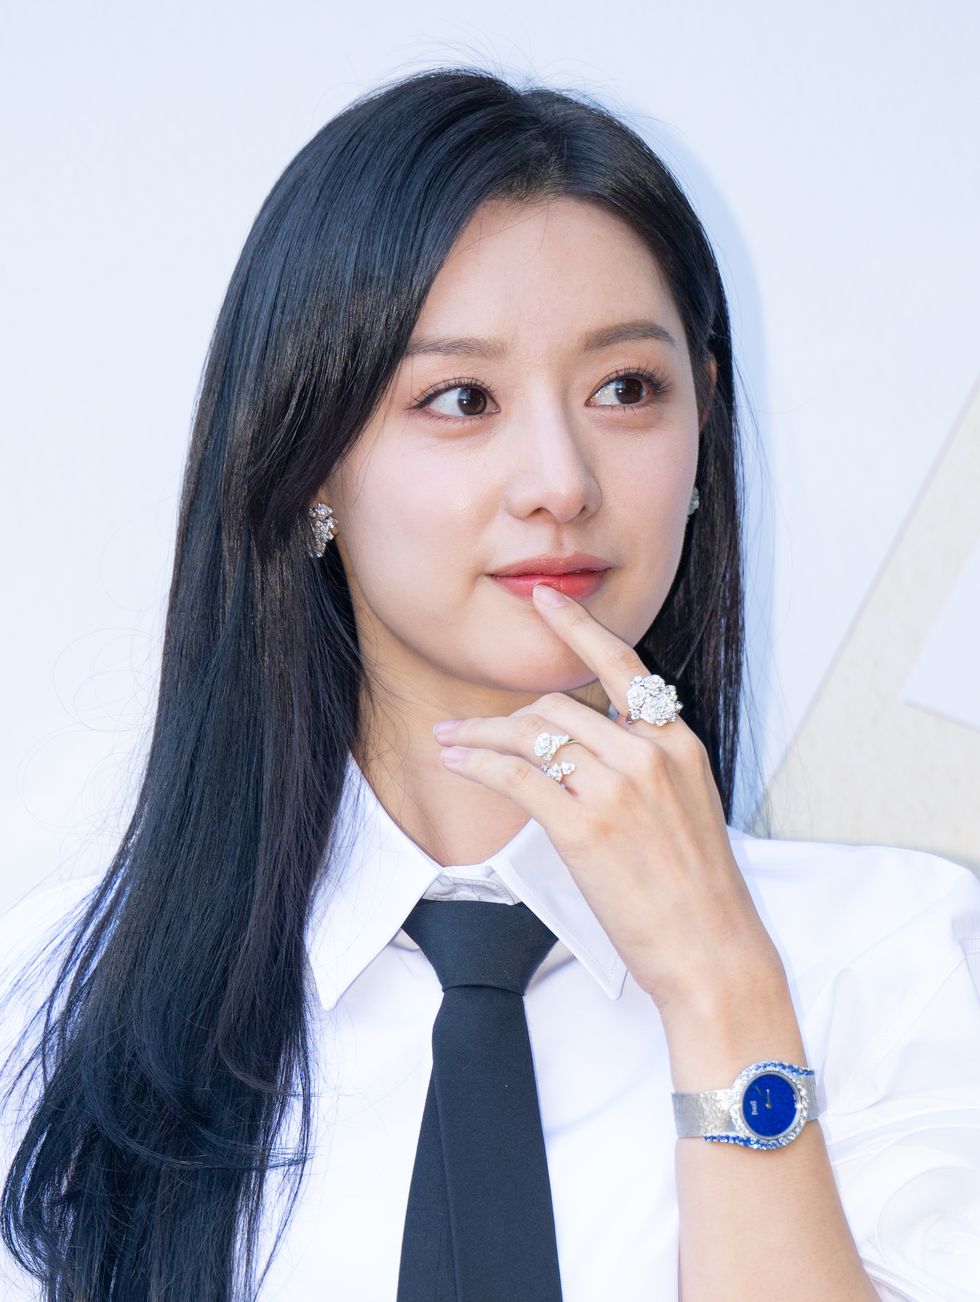 kim ji won poses for pictures during ‘photo event of piaget’ at cociety sung su on nov 8th in seoul, south koreaphotoosen